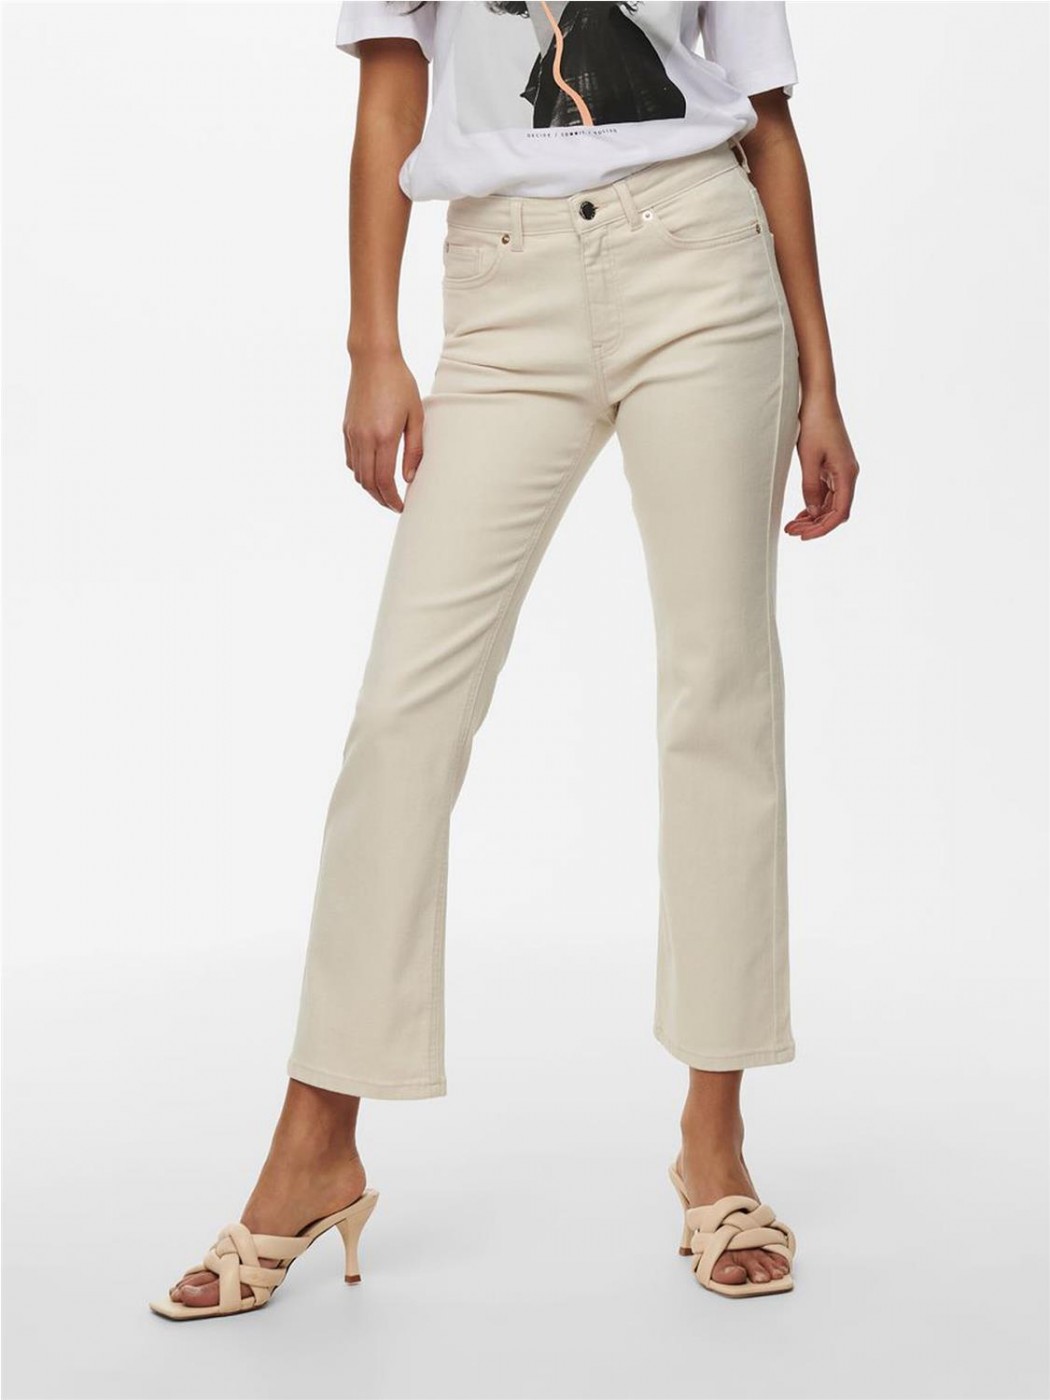 PANTALON ONLY MUJER BEIGE...